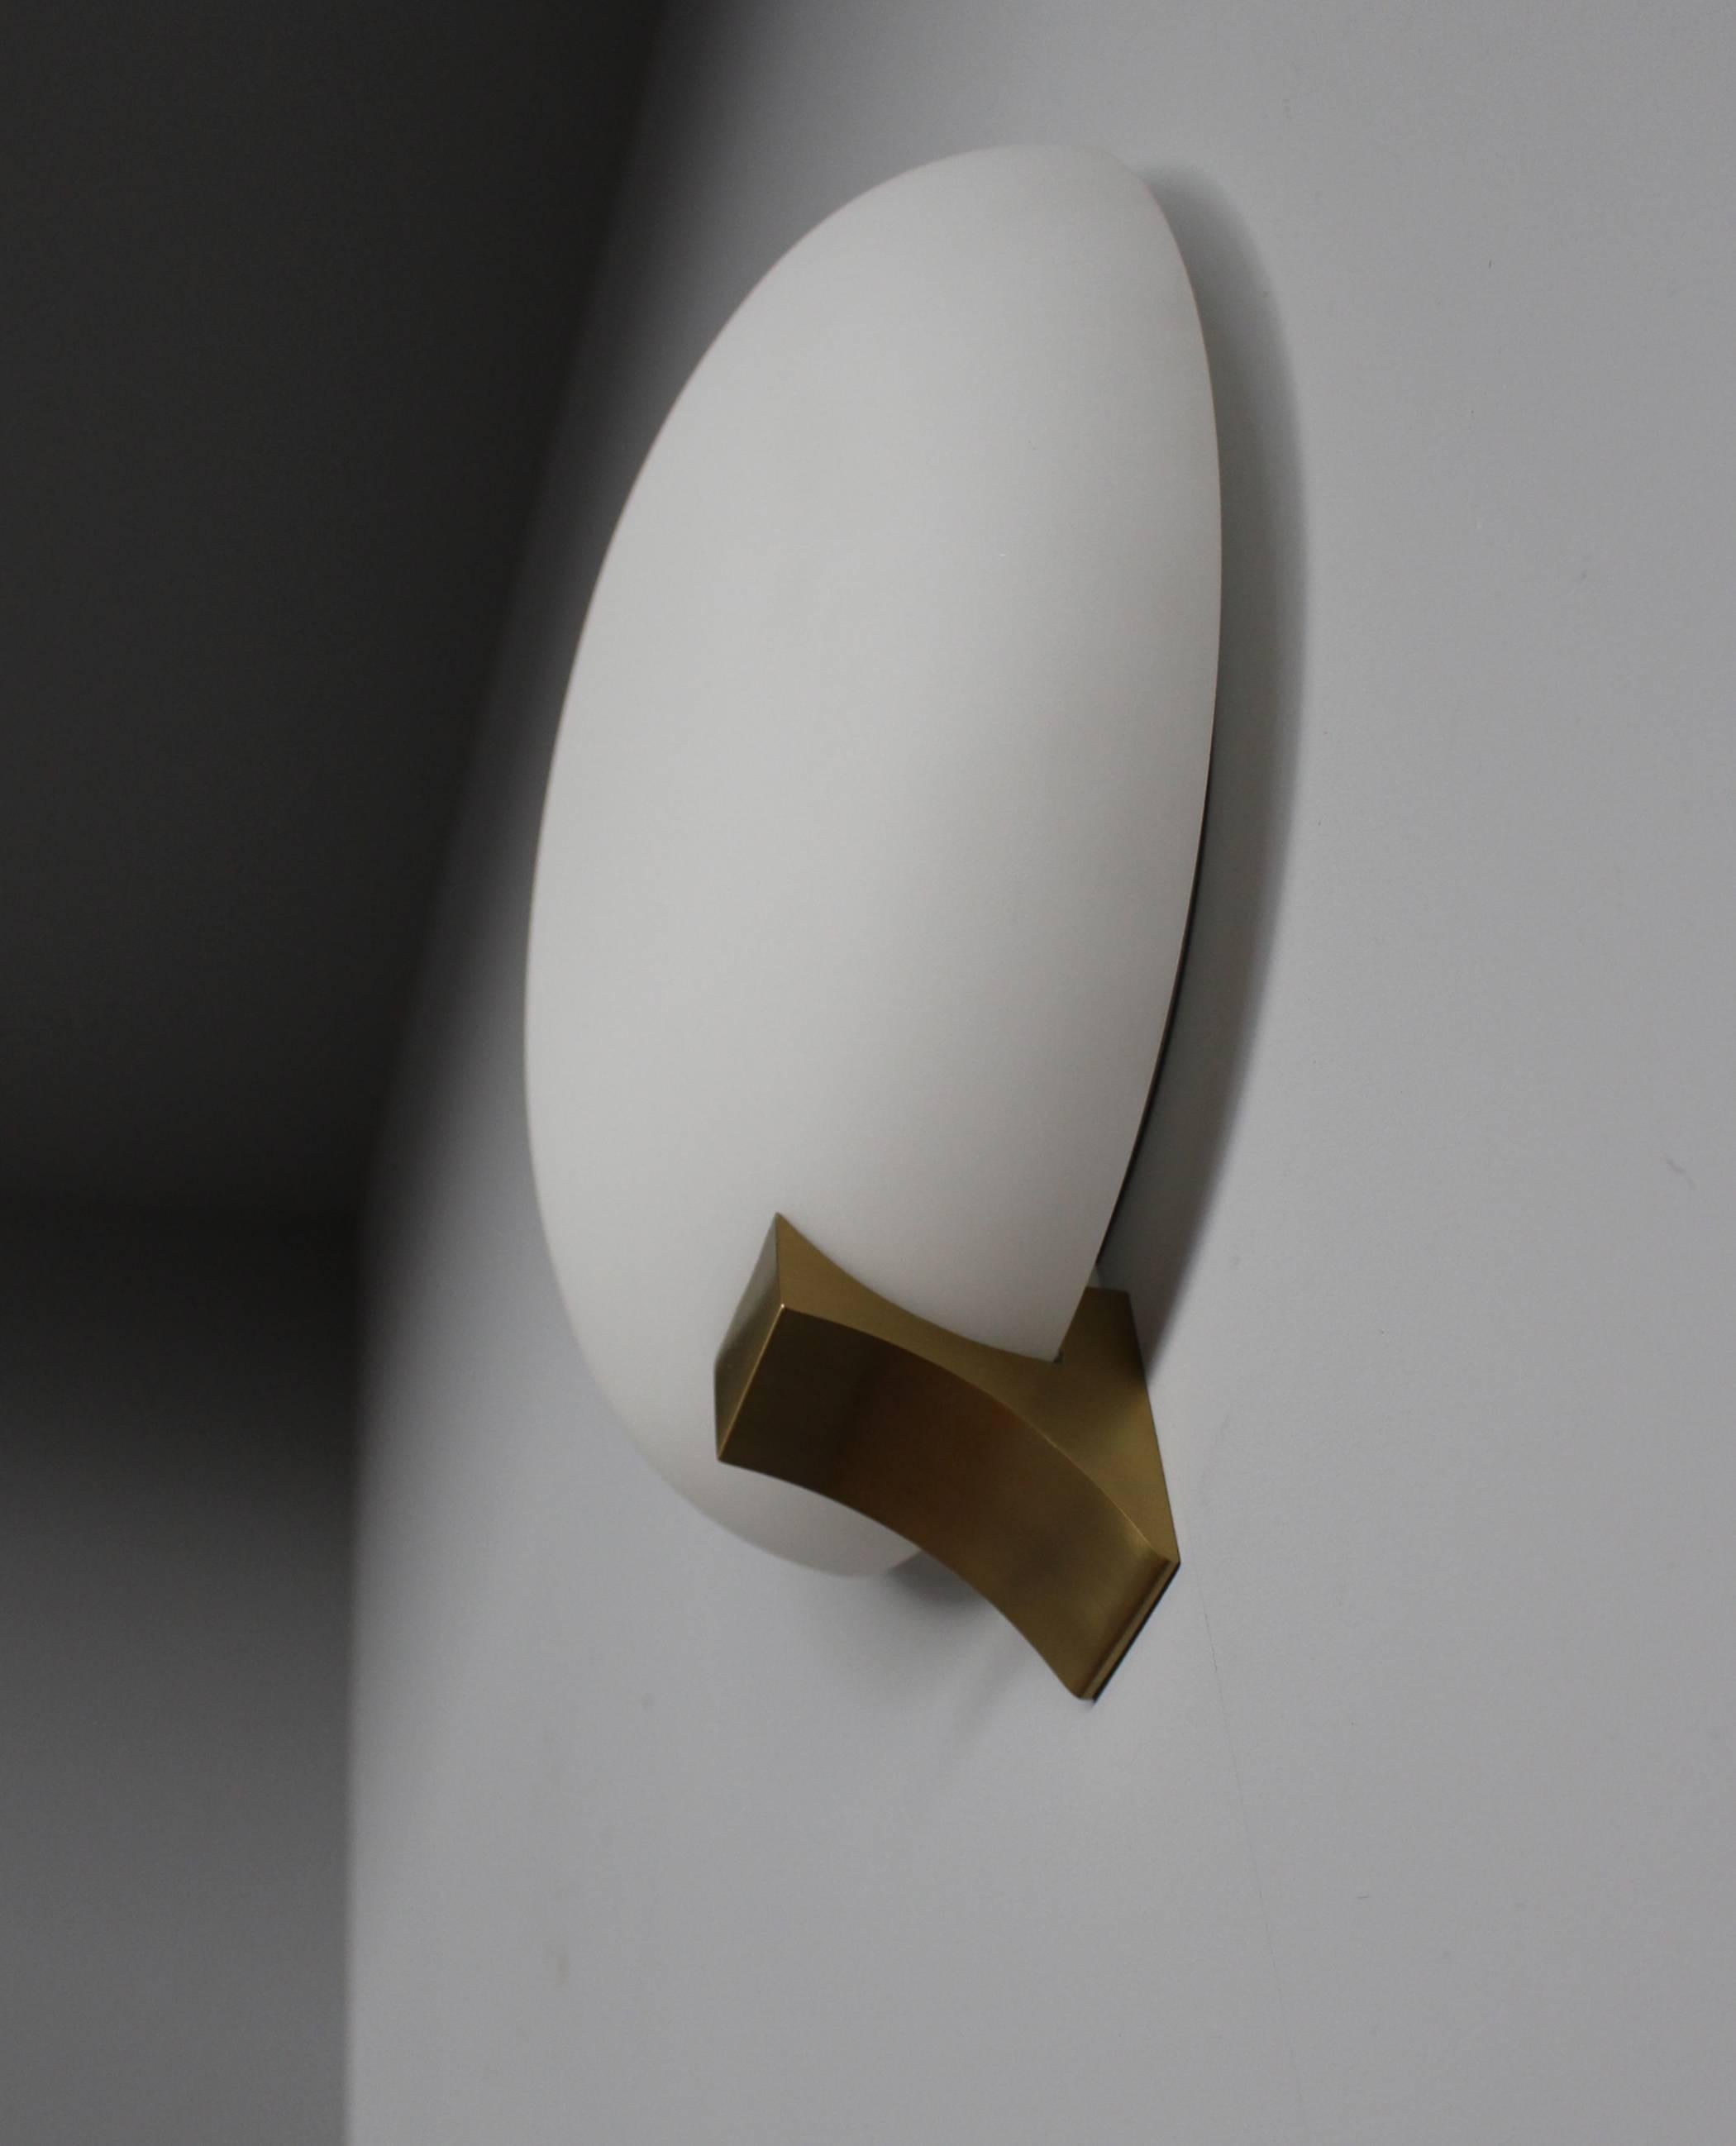 A Fine French Art Deco Glass and Bronze Sconce by Jean Perzel For Sale 1